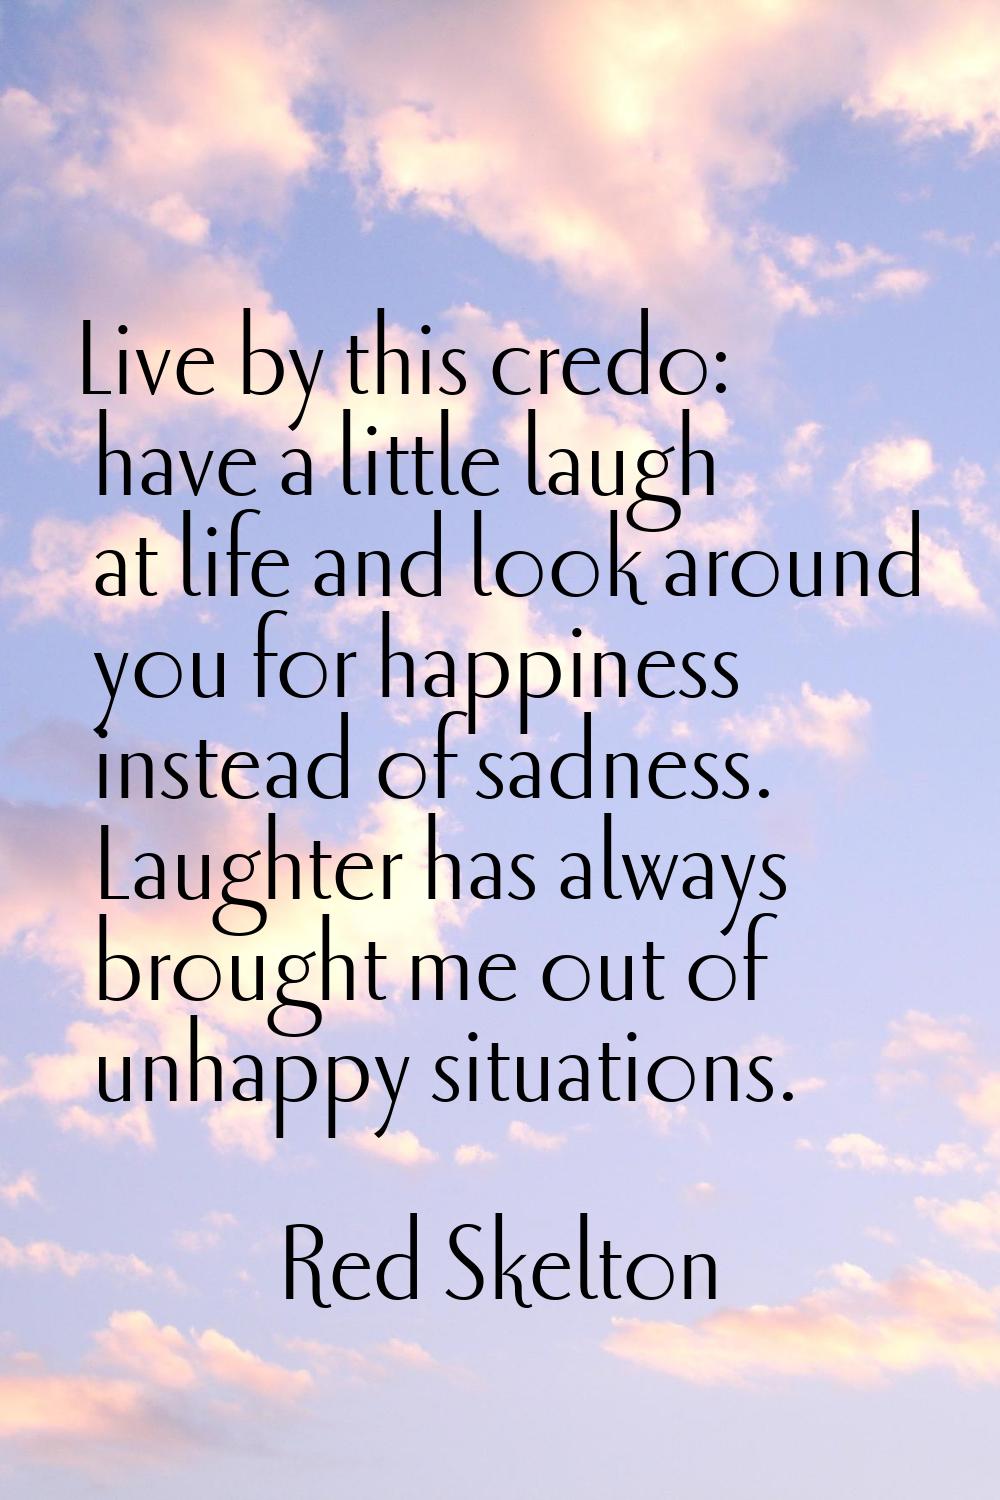 Live by this credo: have a little laugh at life and look around you for happiness instead of sadnes